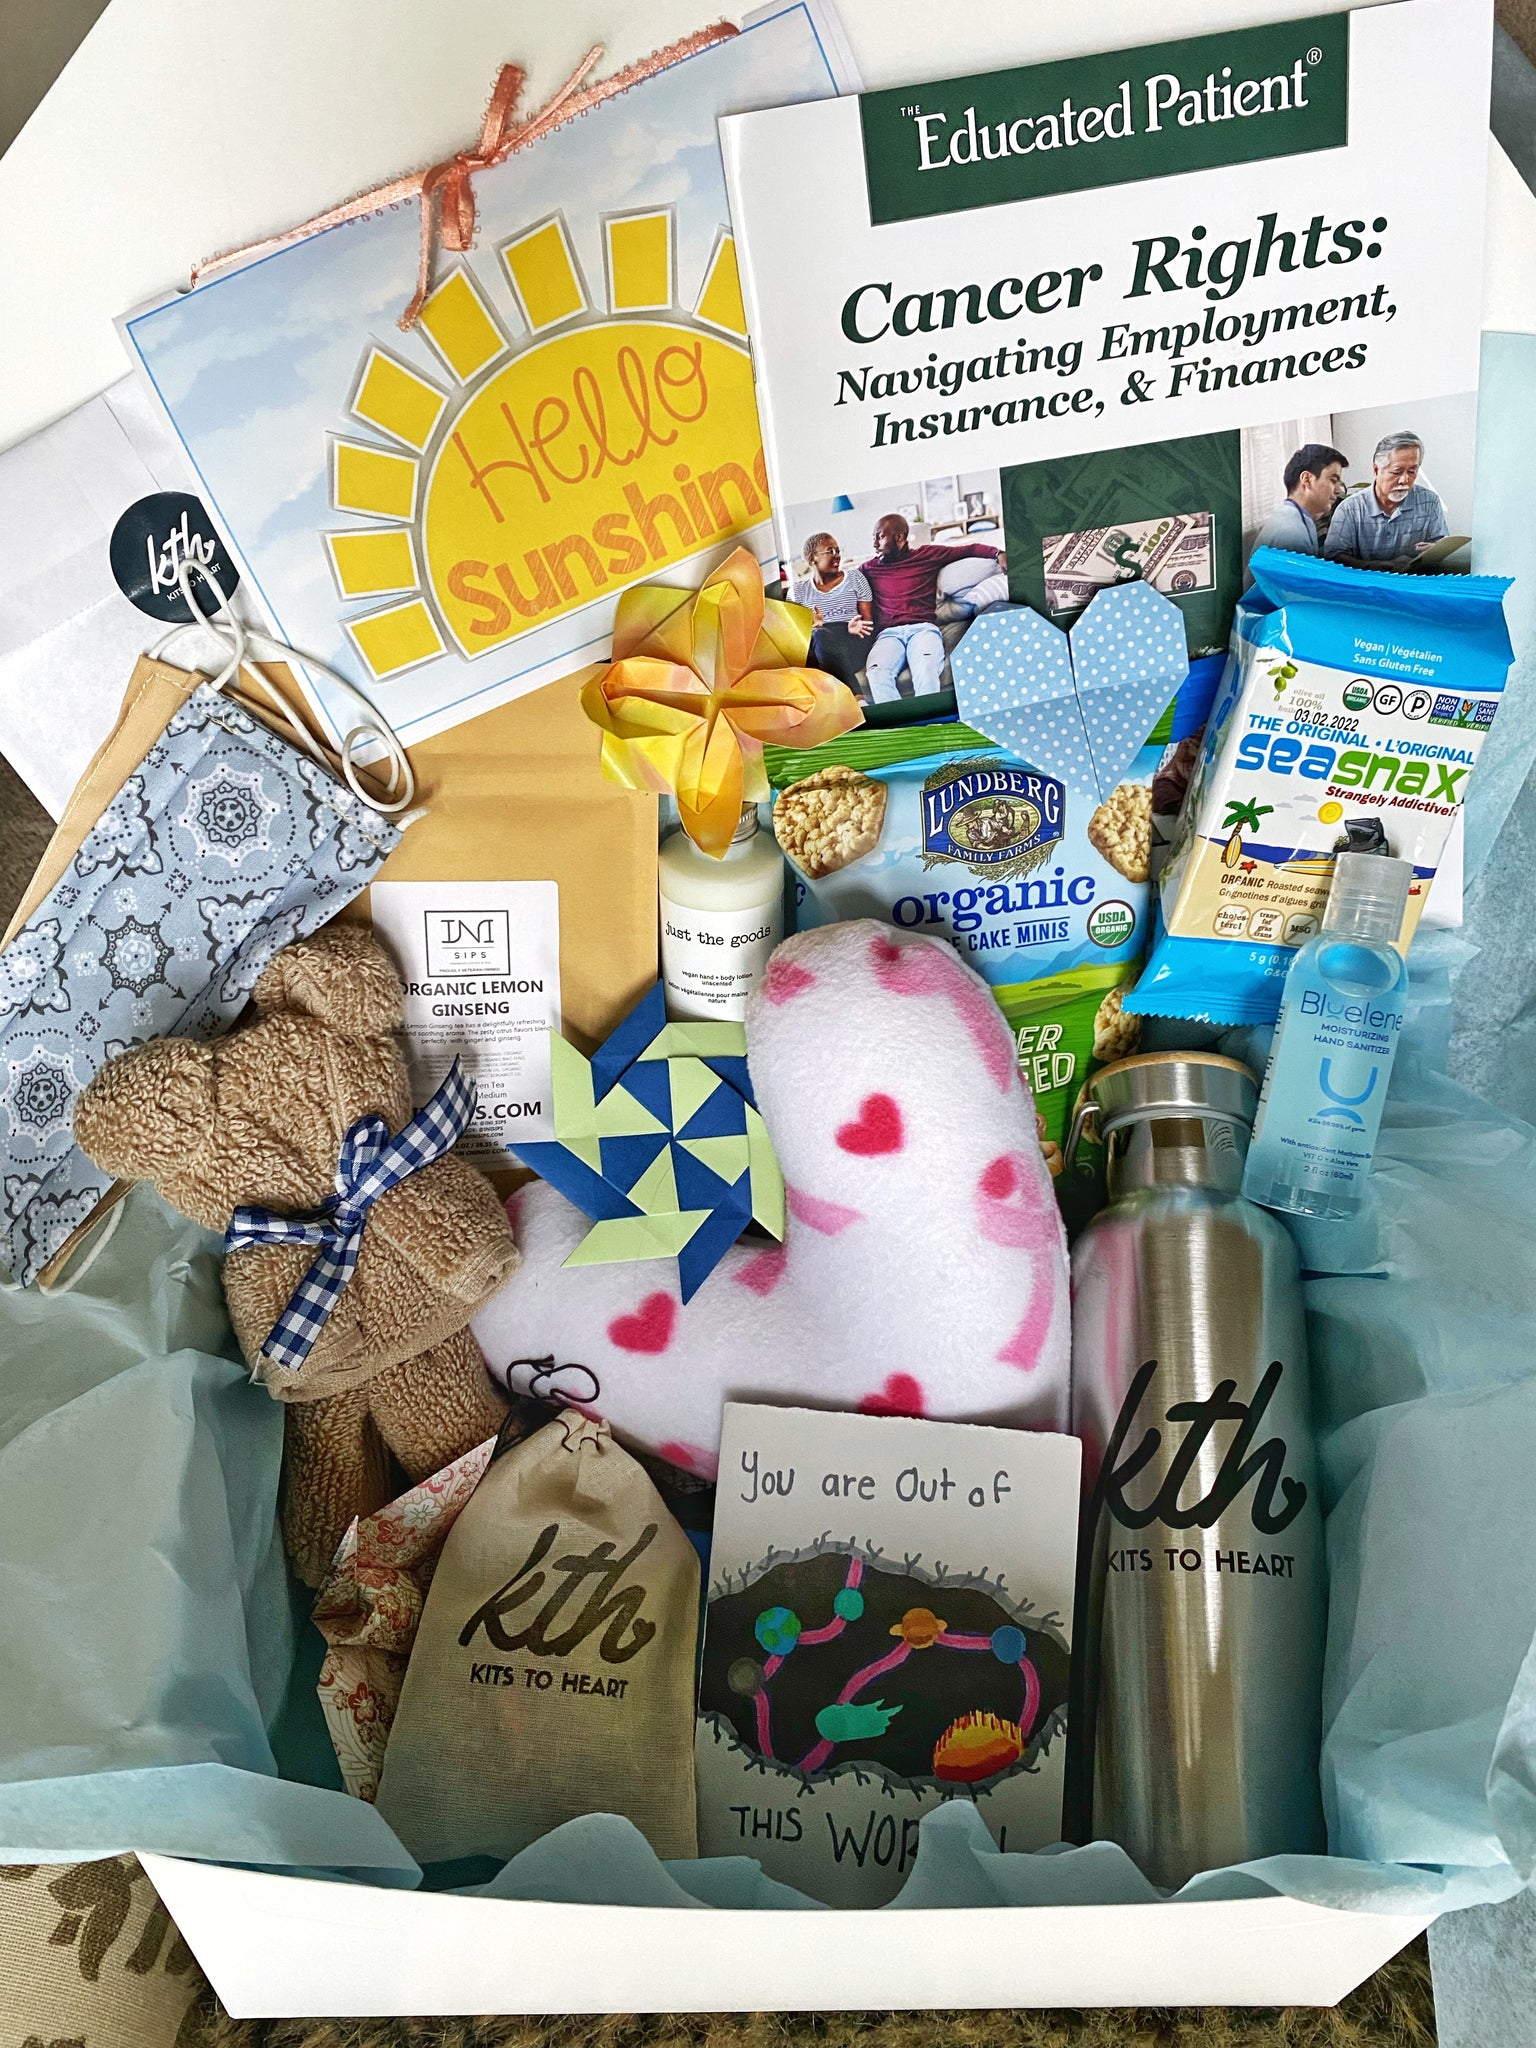 How To Choose Thoughtful Gifts For Cancer Patients | 56 Ideas